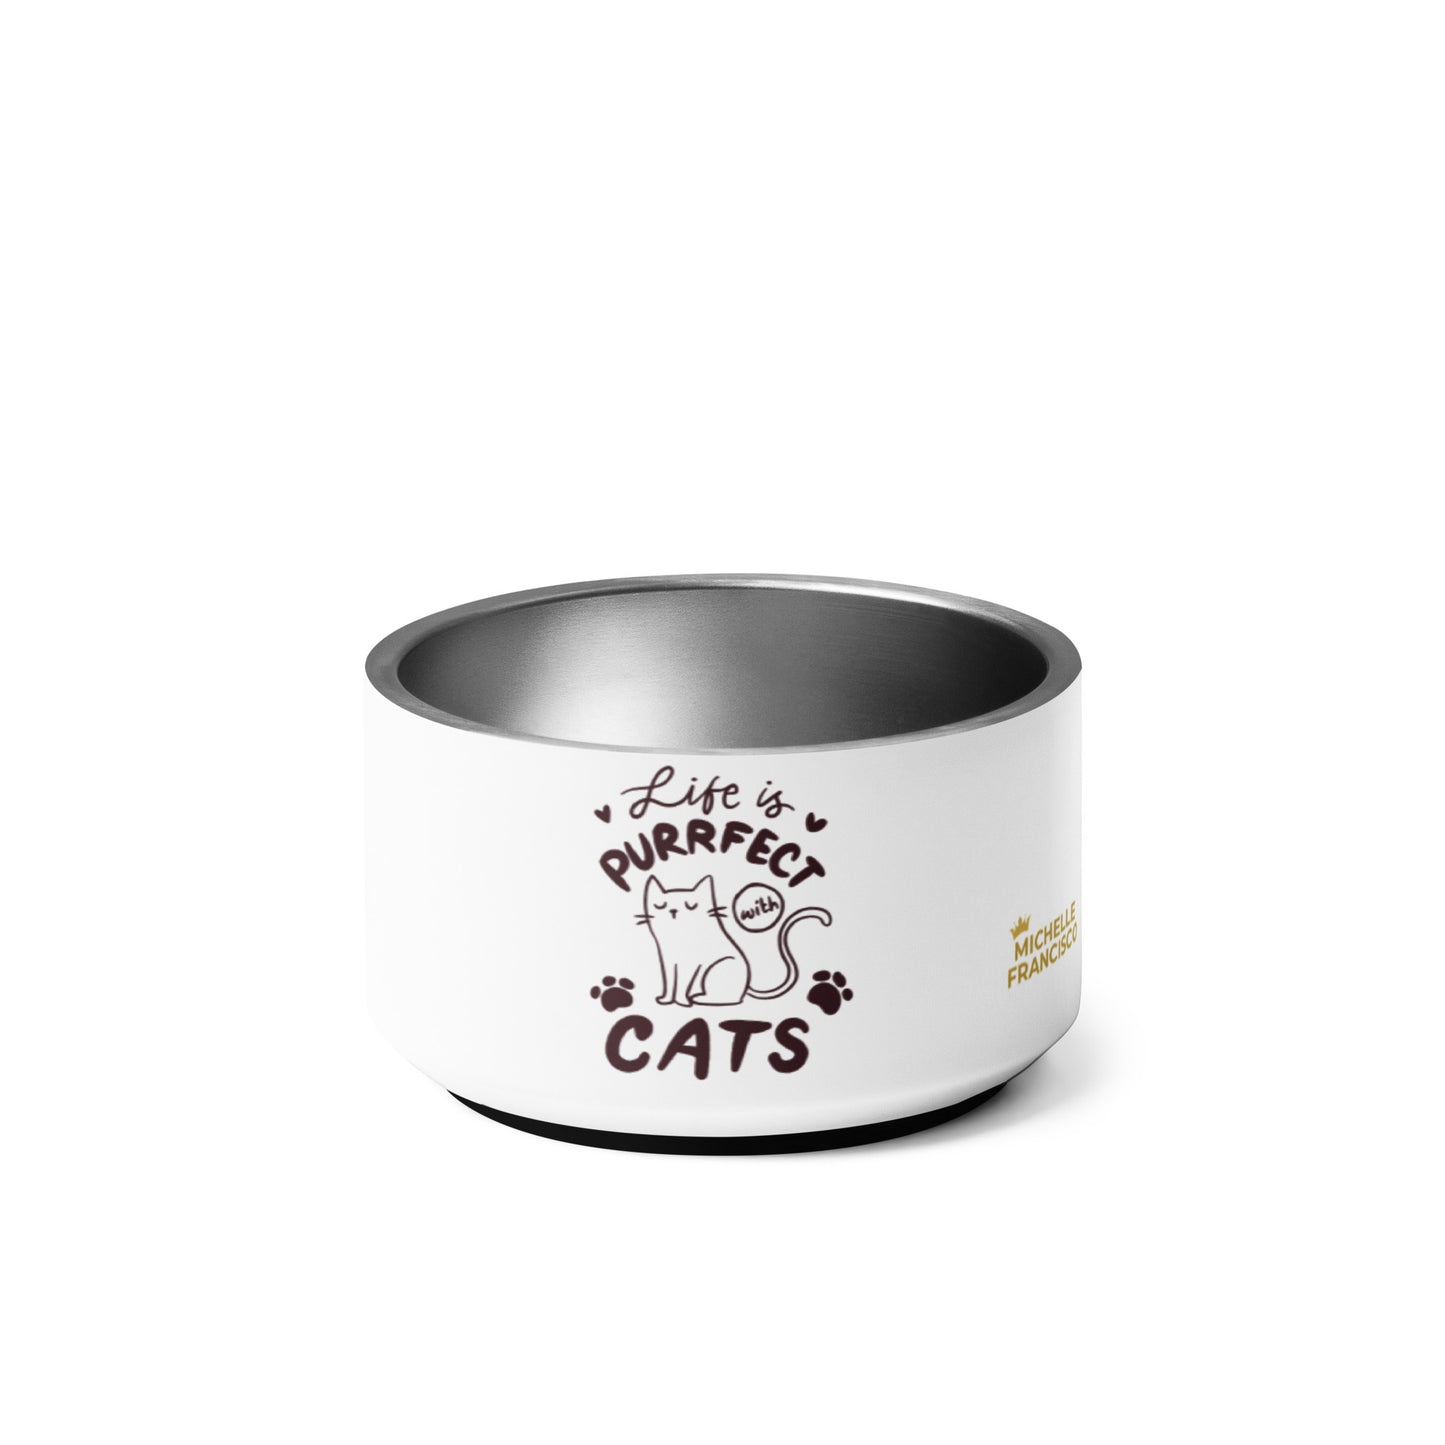 Life Is Purrfect With Cats Pet Bowl